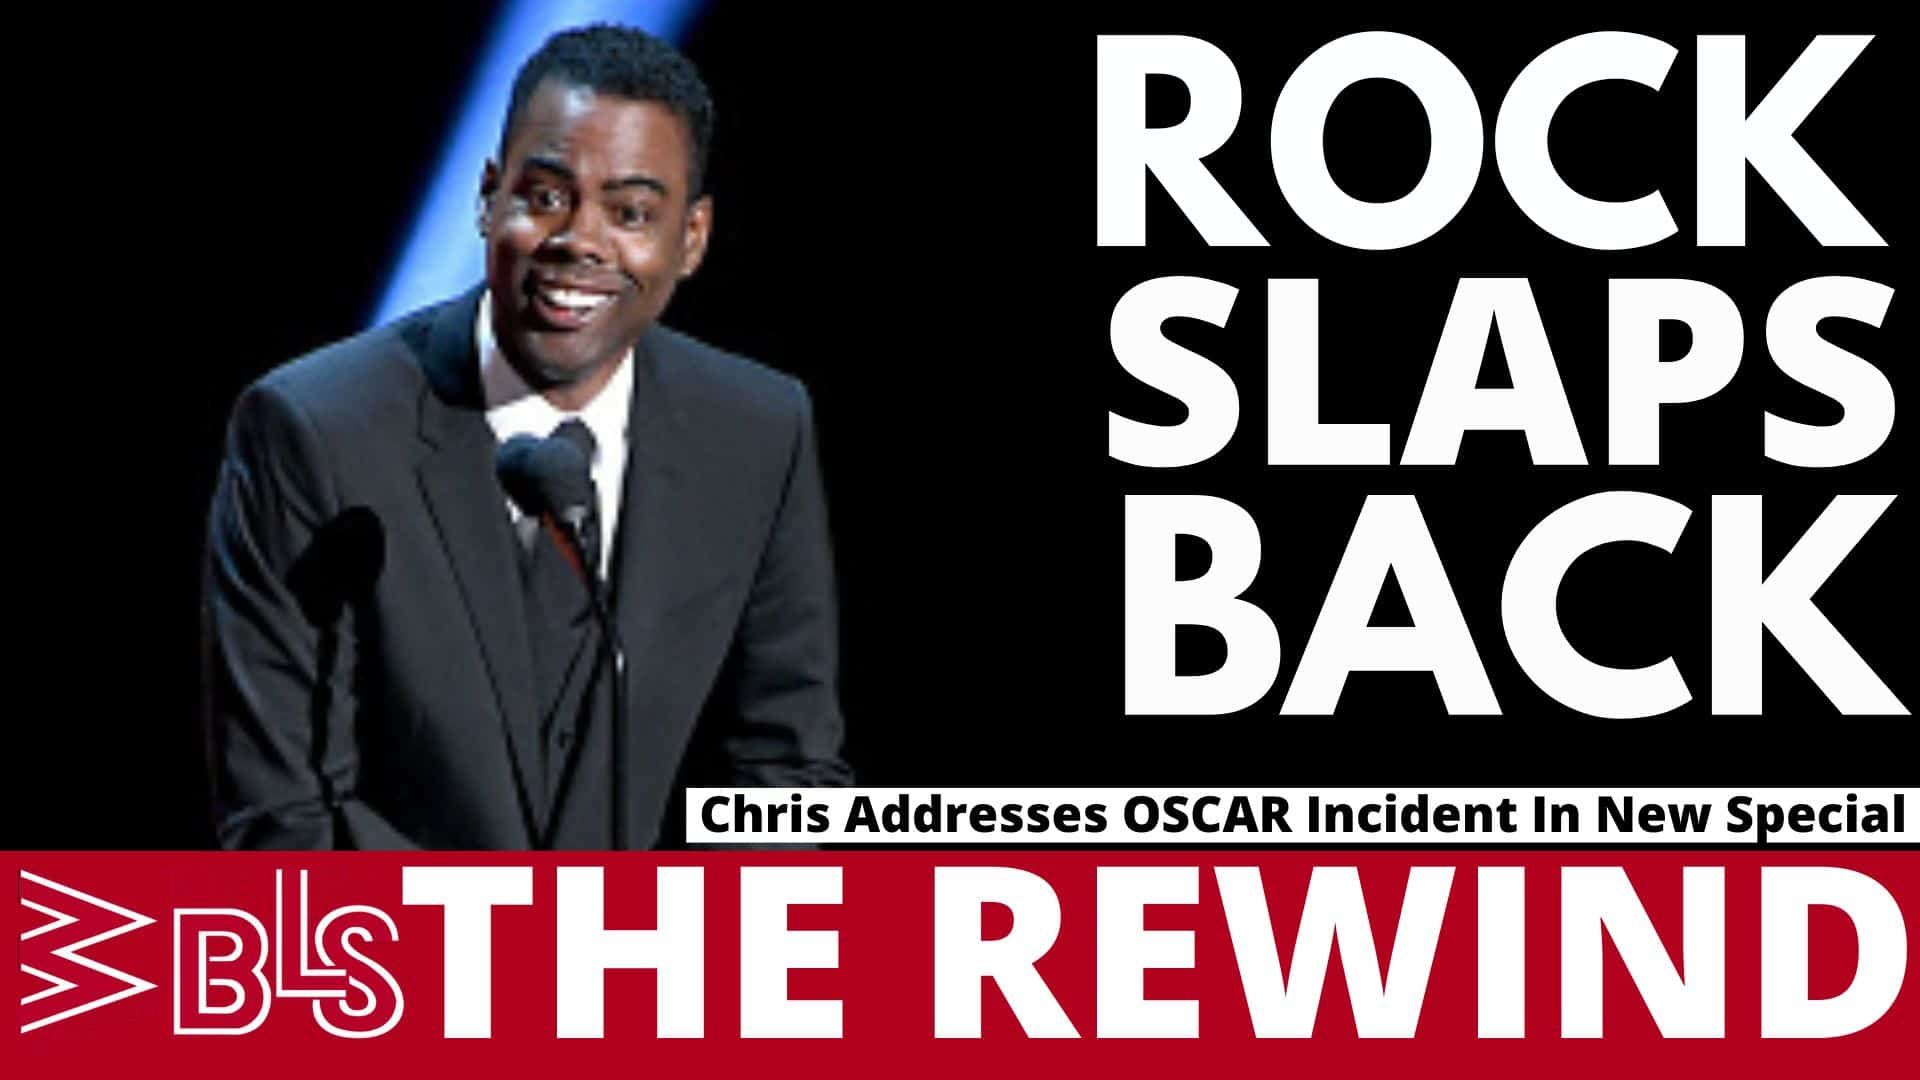 Chris Rock Will Address Oscars In Netflix Special, Chaka Khan Calls Out Mary J. Blige's Vocals